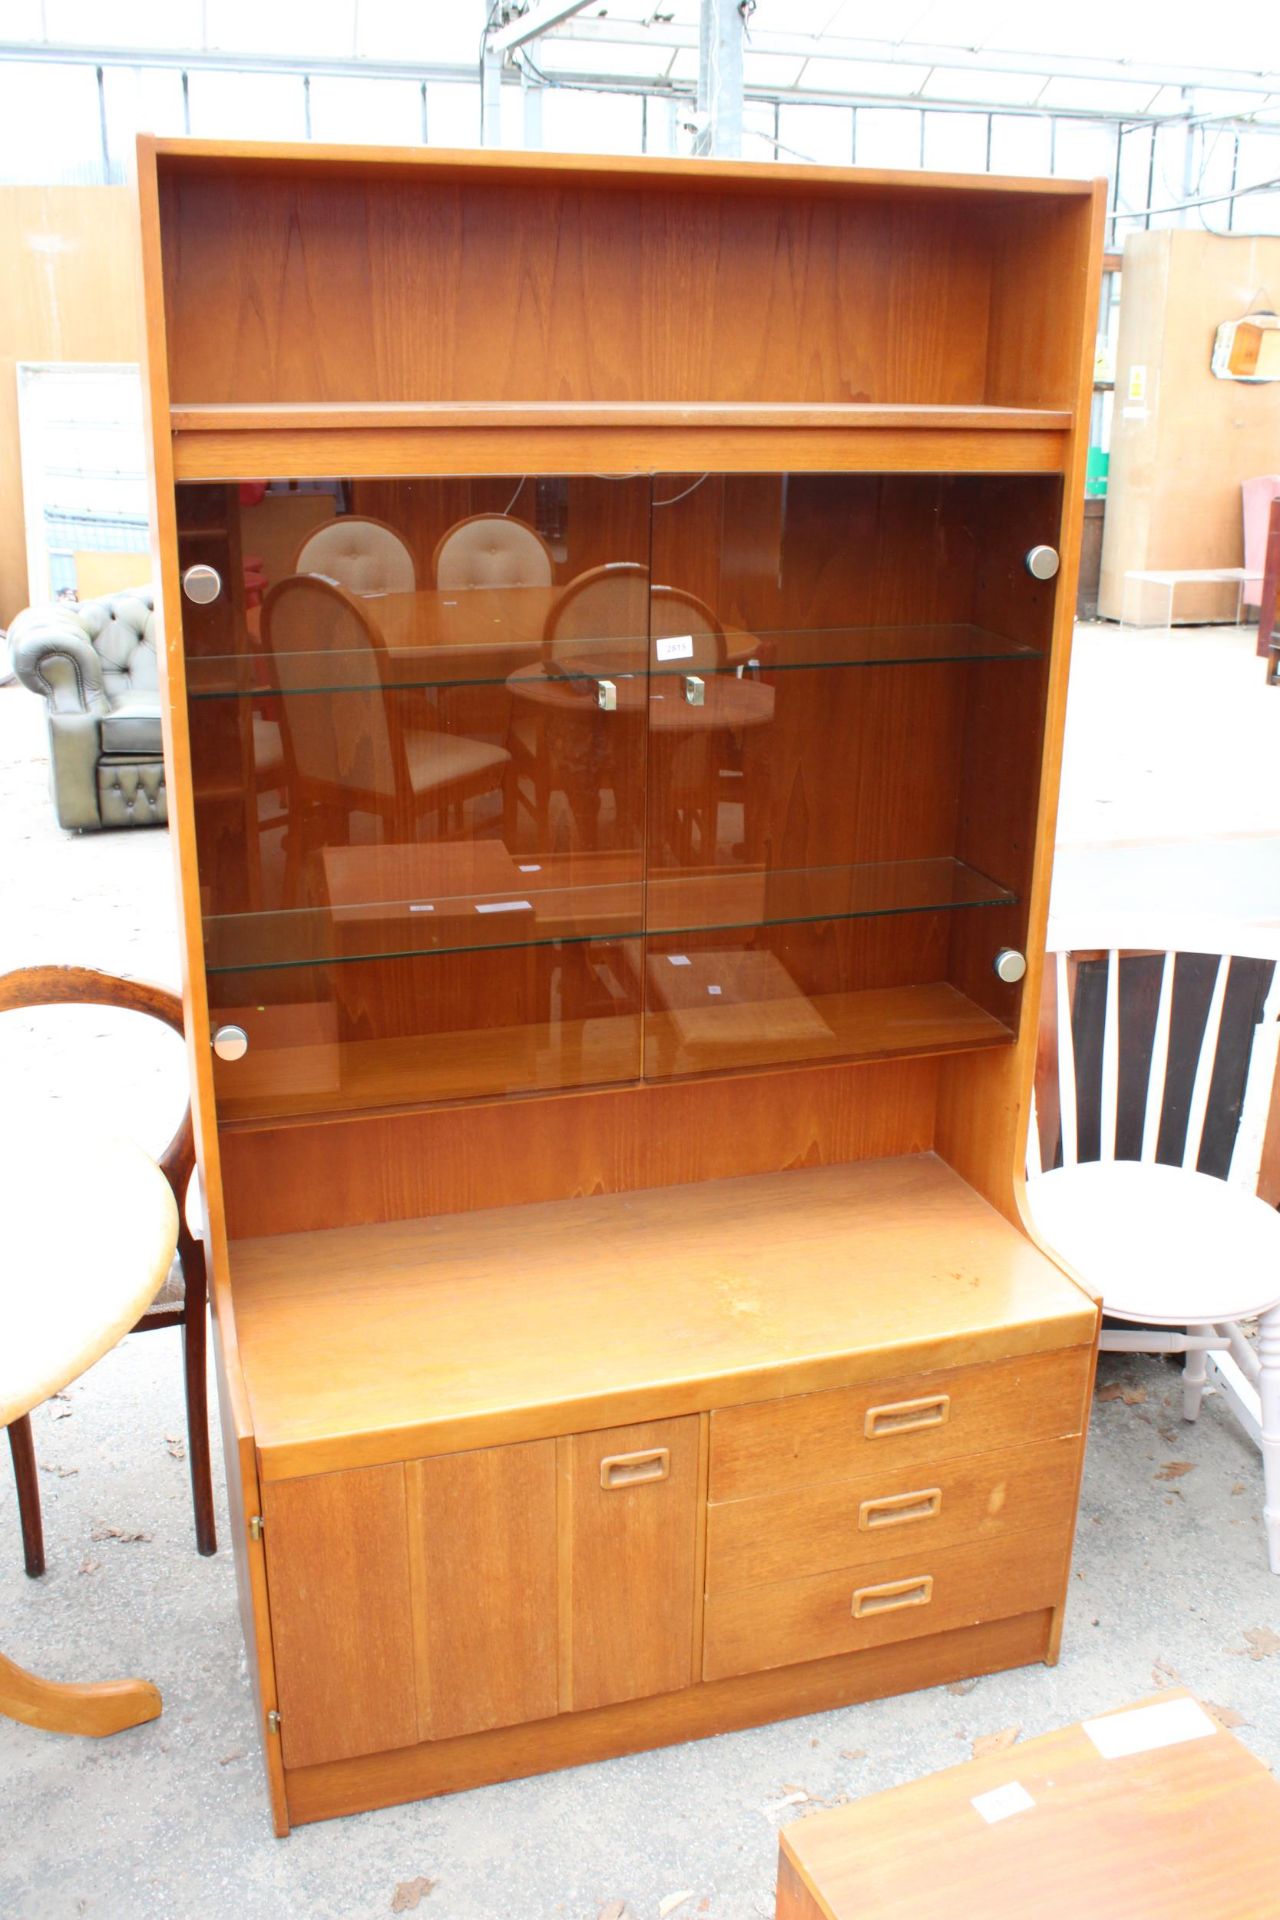 A RETRO TEAK UNIT WITH SMOKED GLASS DOORS, CUPBOARD AND DRAWERS TO BASE. 39.5" WIDE